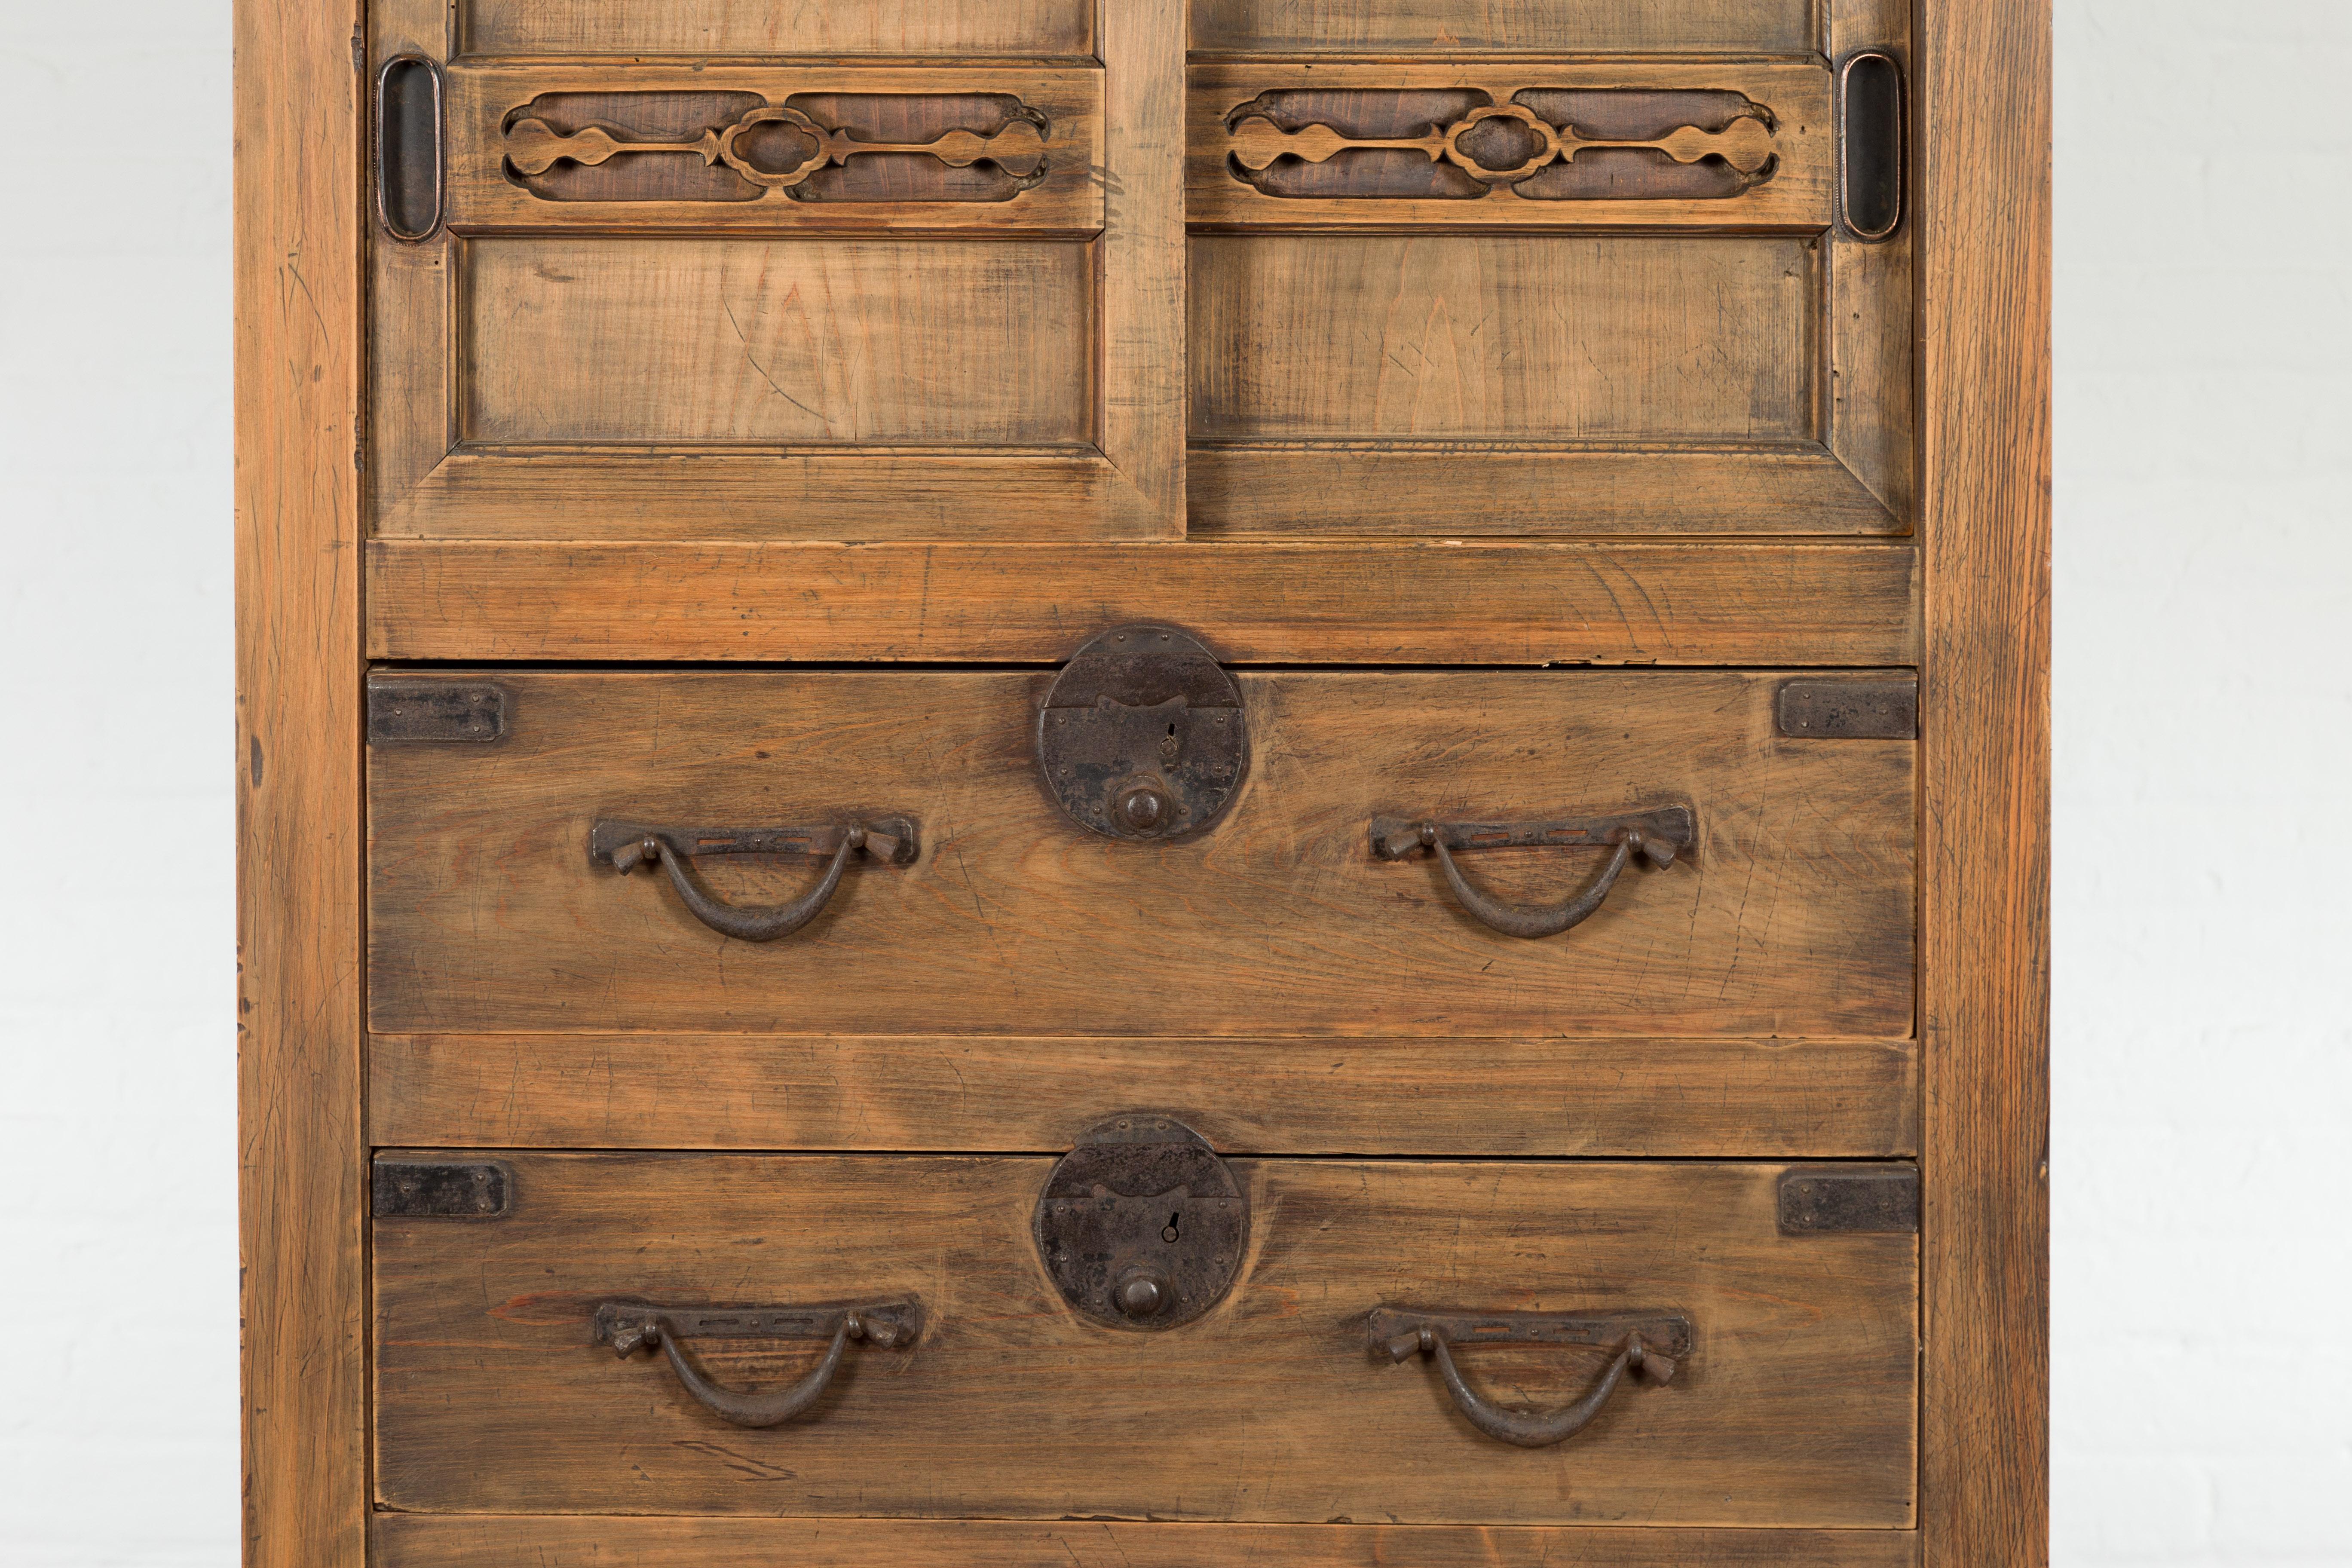 Iron Japanese Late Meiji Period Tansu Clothing Chest with Sliding Doors and Drawers